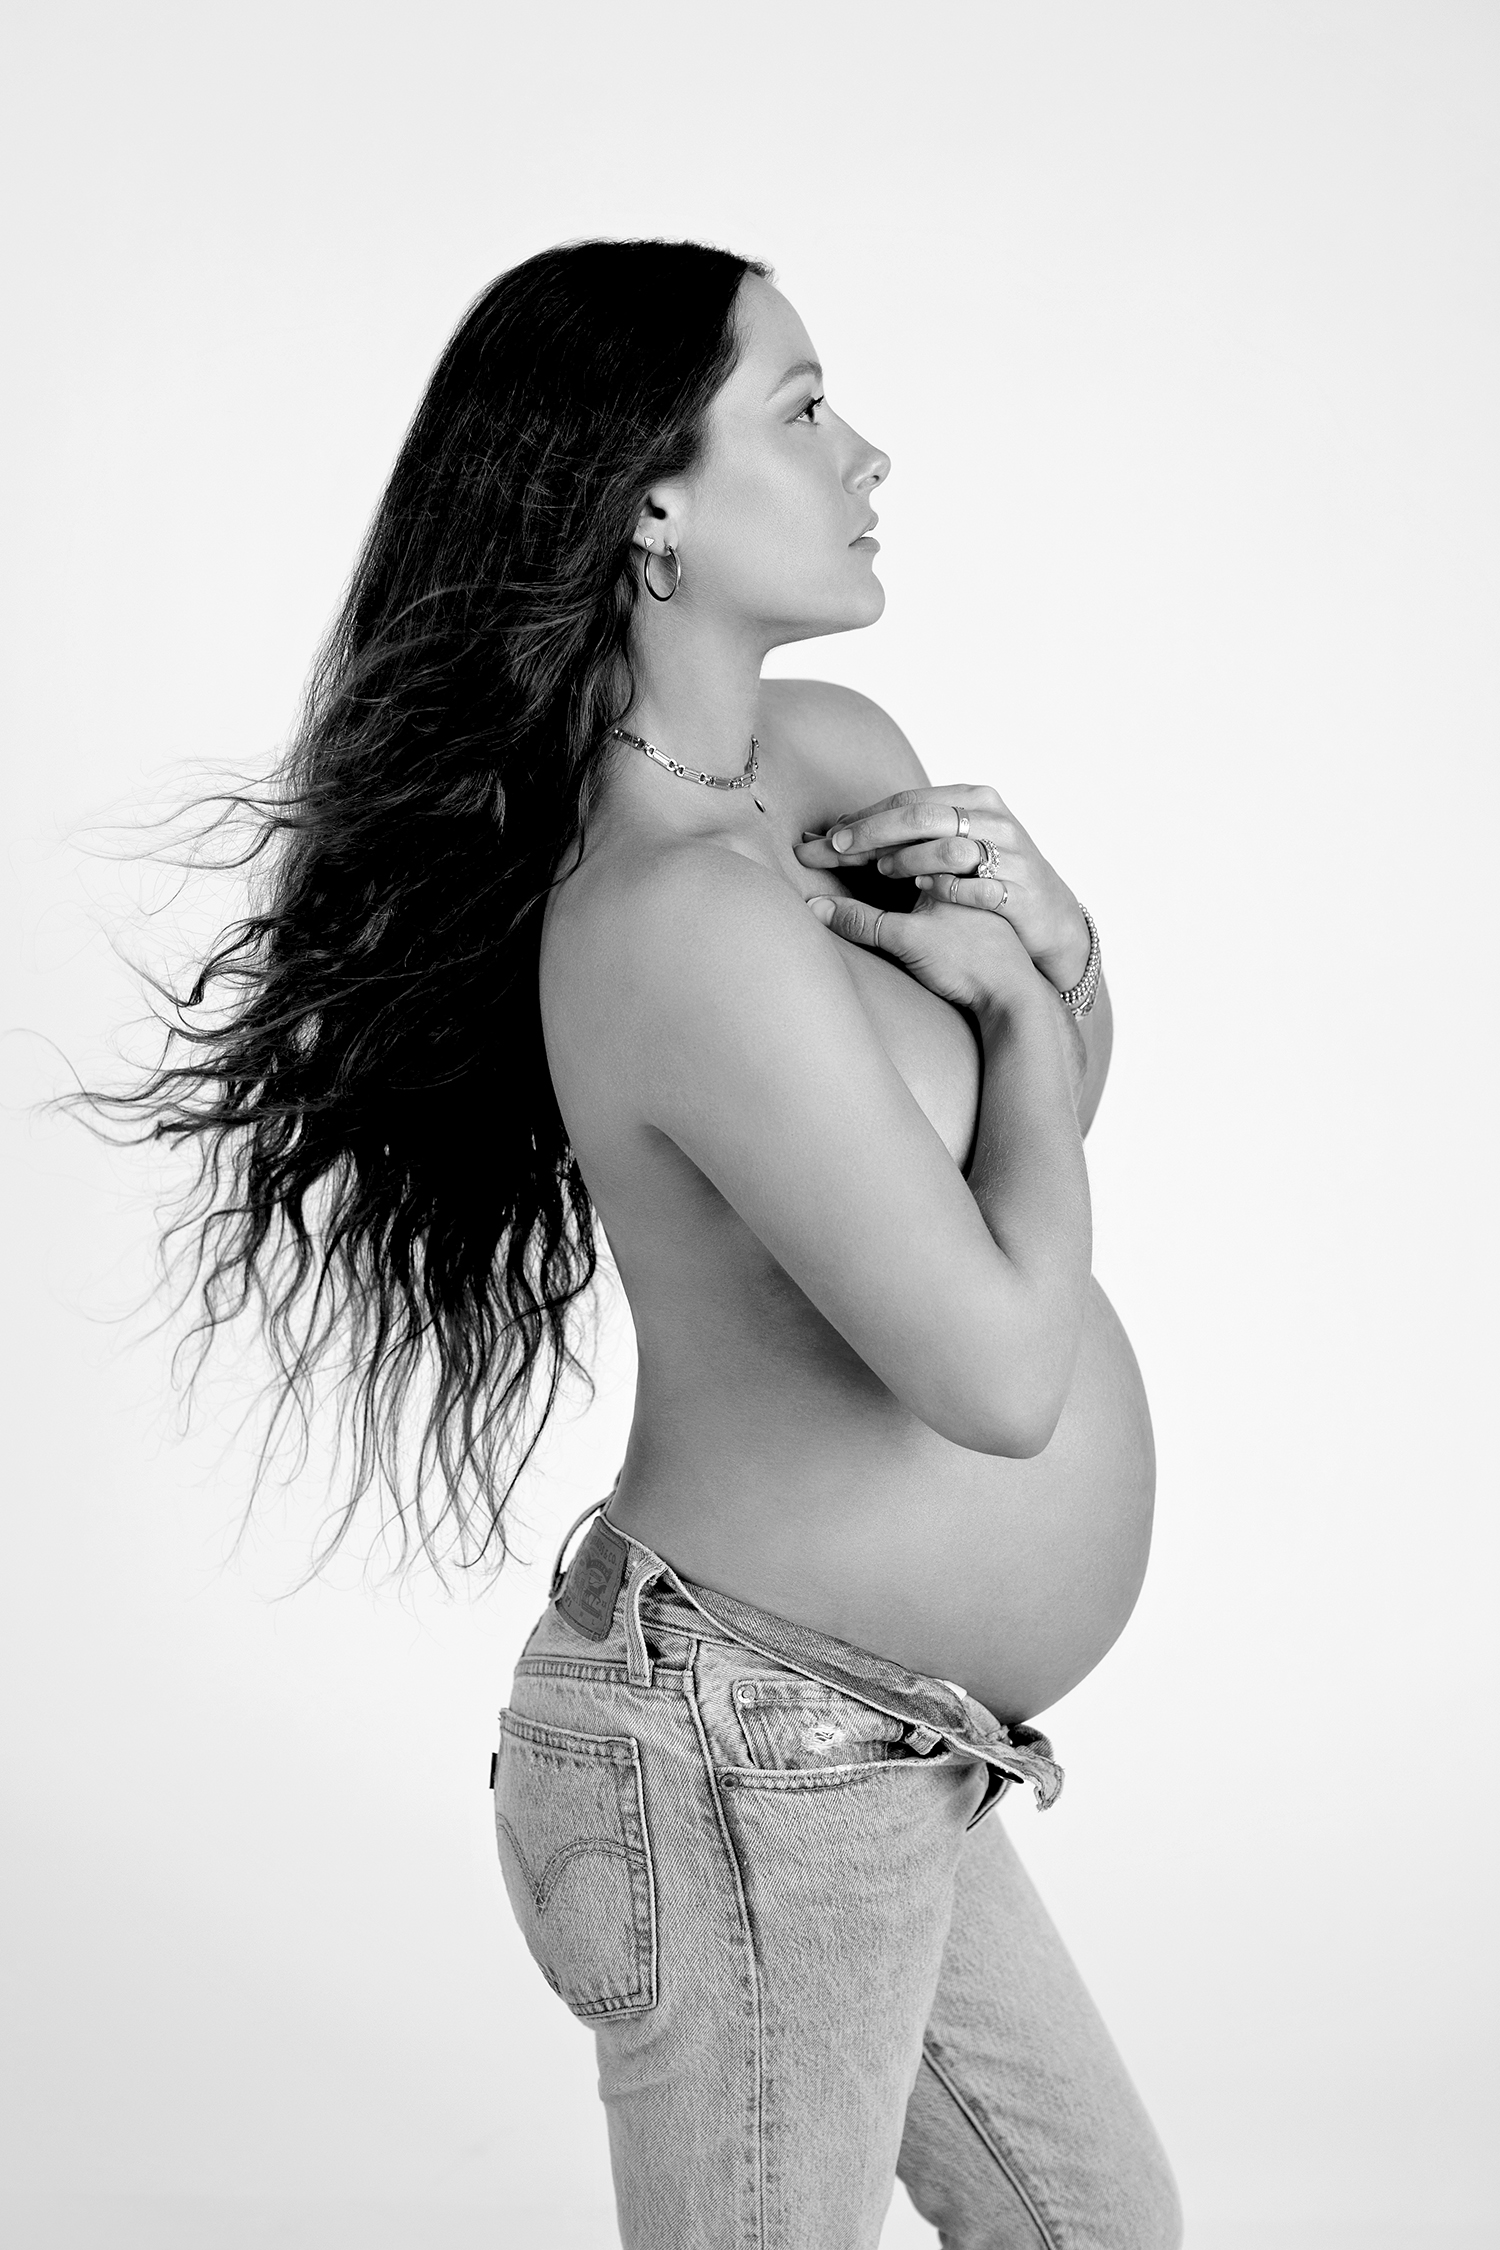 A timeless black and white maternity photo, featuring a mom-to-be cradling her heart and looking towards the future with anticipation